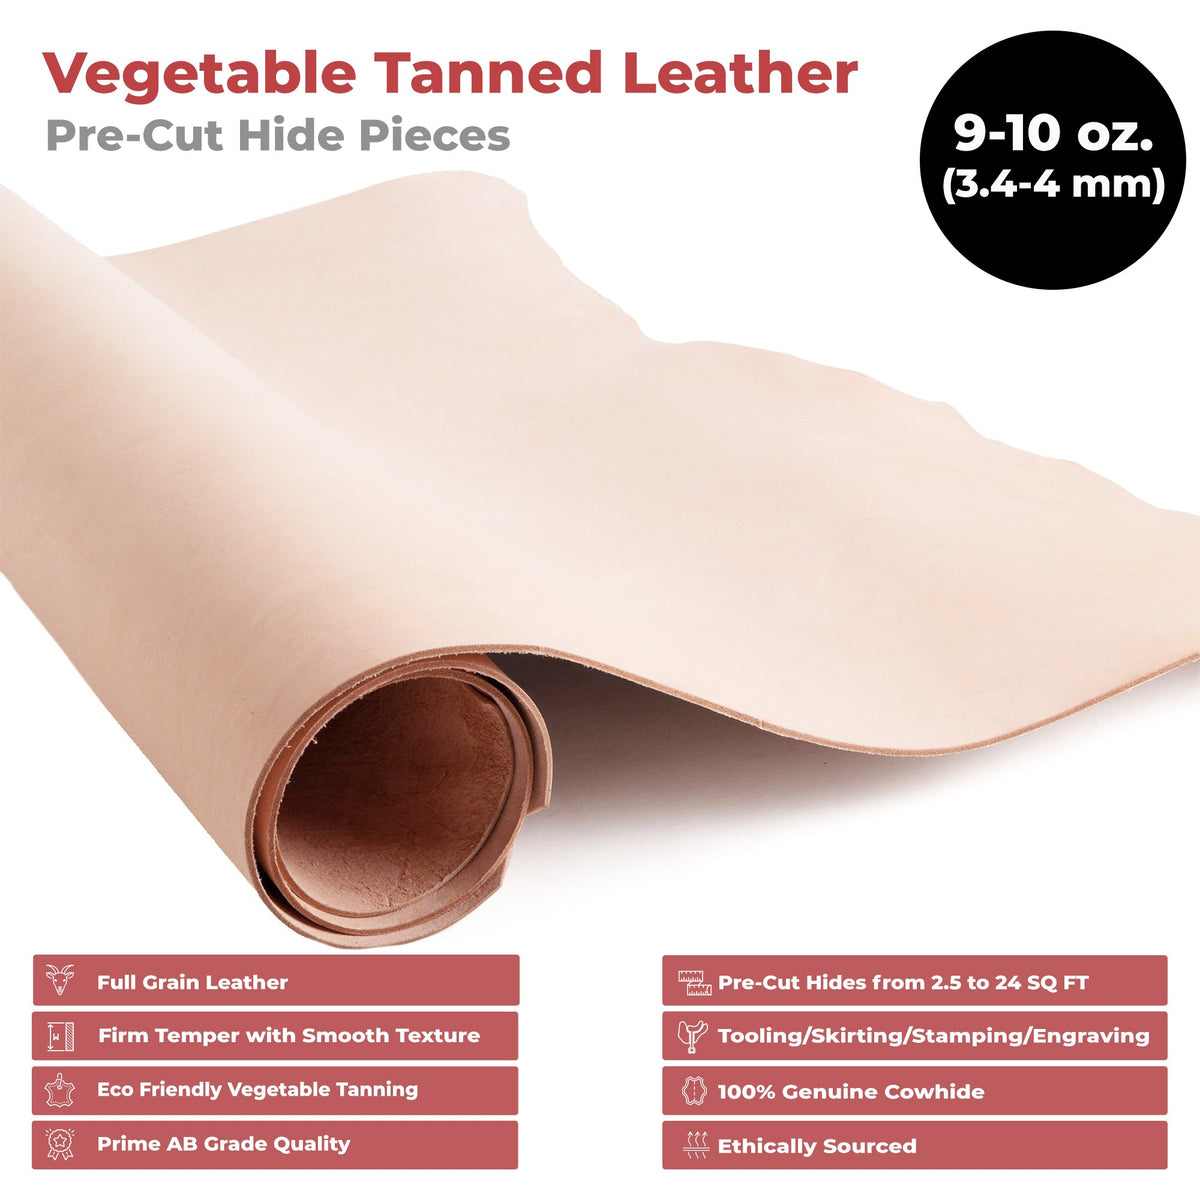  European Leather Work 9-10 oz. (3.6-4mm) Oil-Tanned